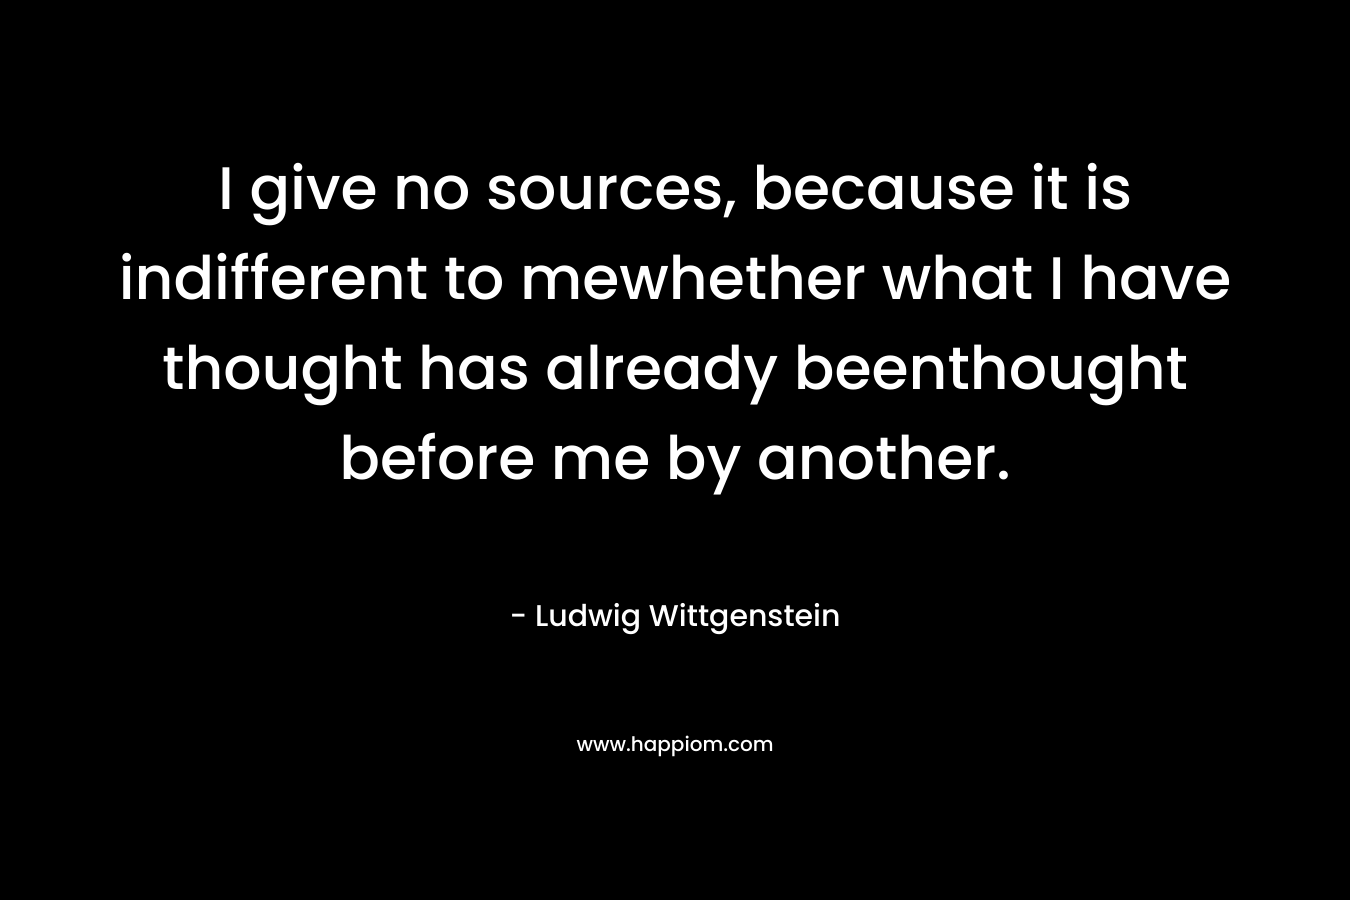 I give no sources, because it is indifferent to mewhether what I have thought has already beenthought before me by another. – Ludwig Wittgenstein